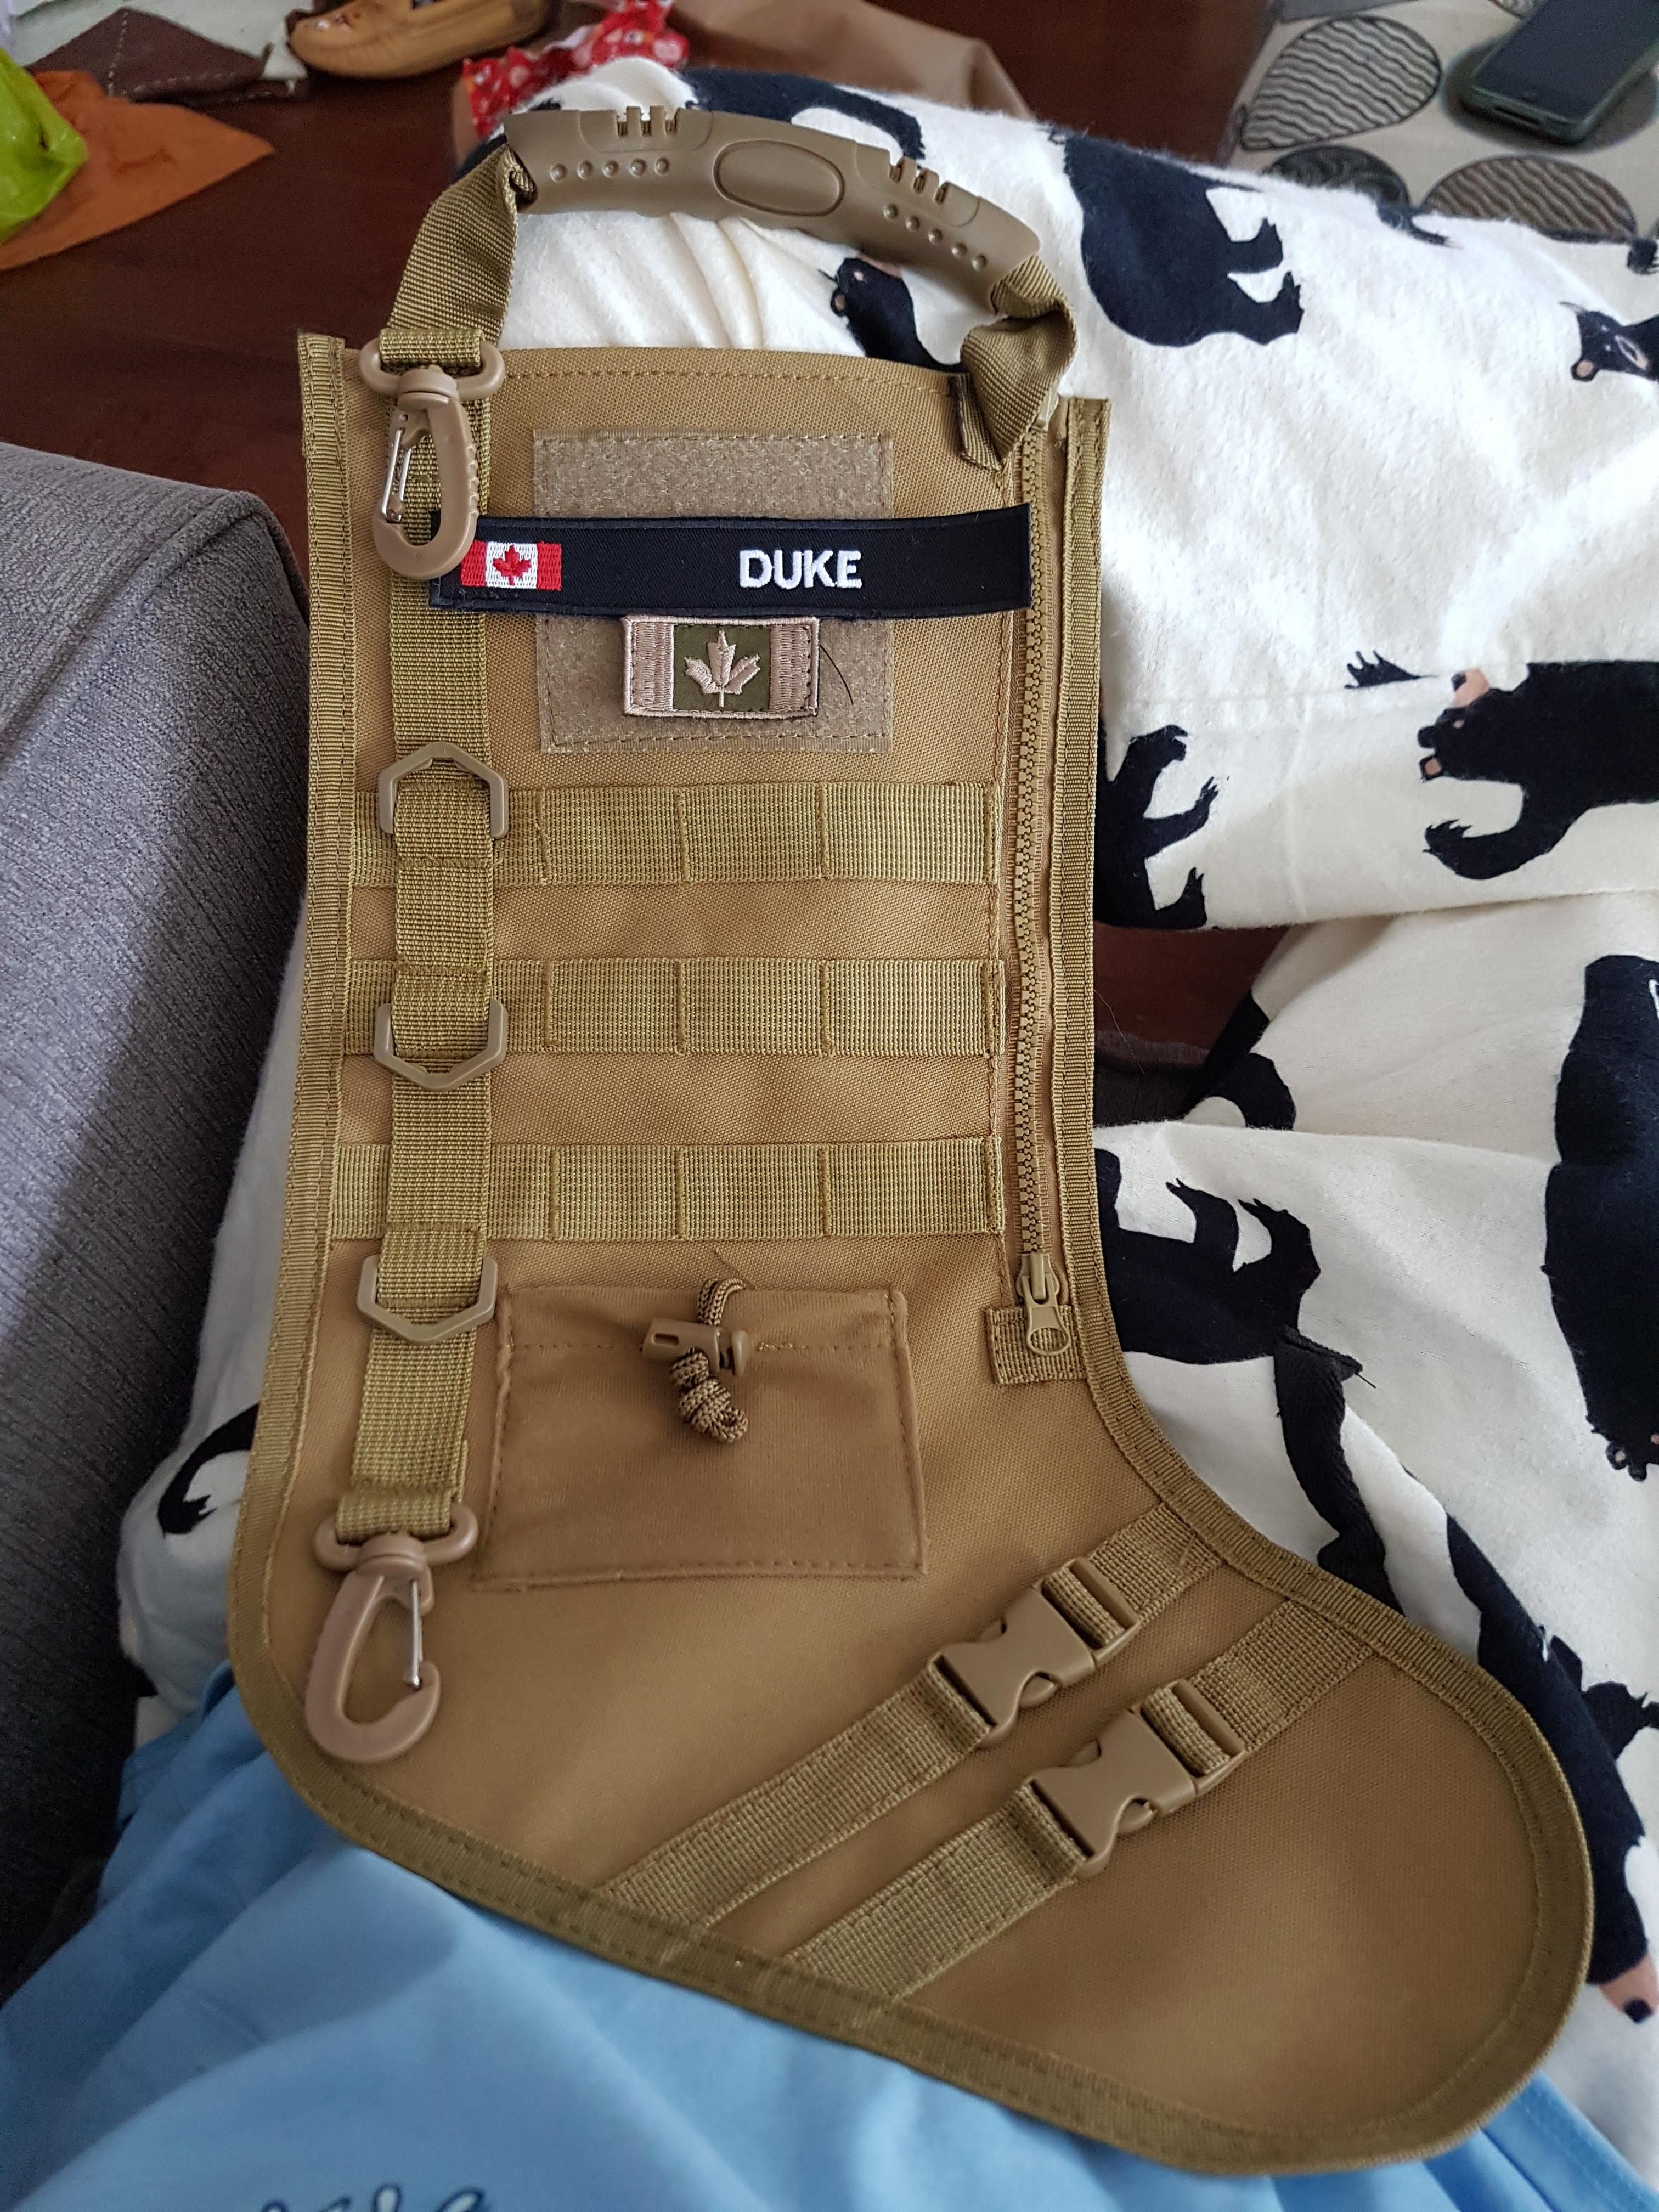 This tactical Christmas stocking